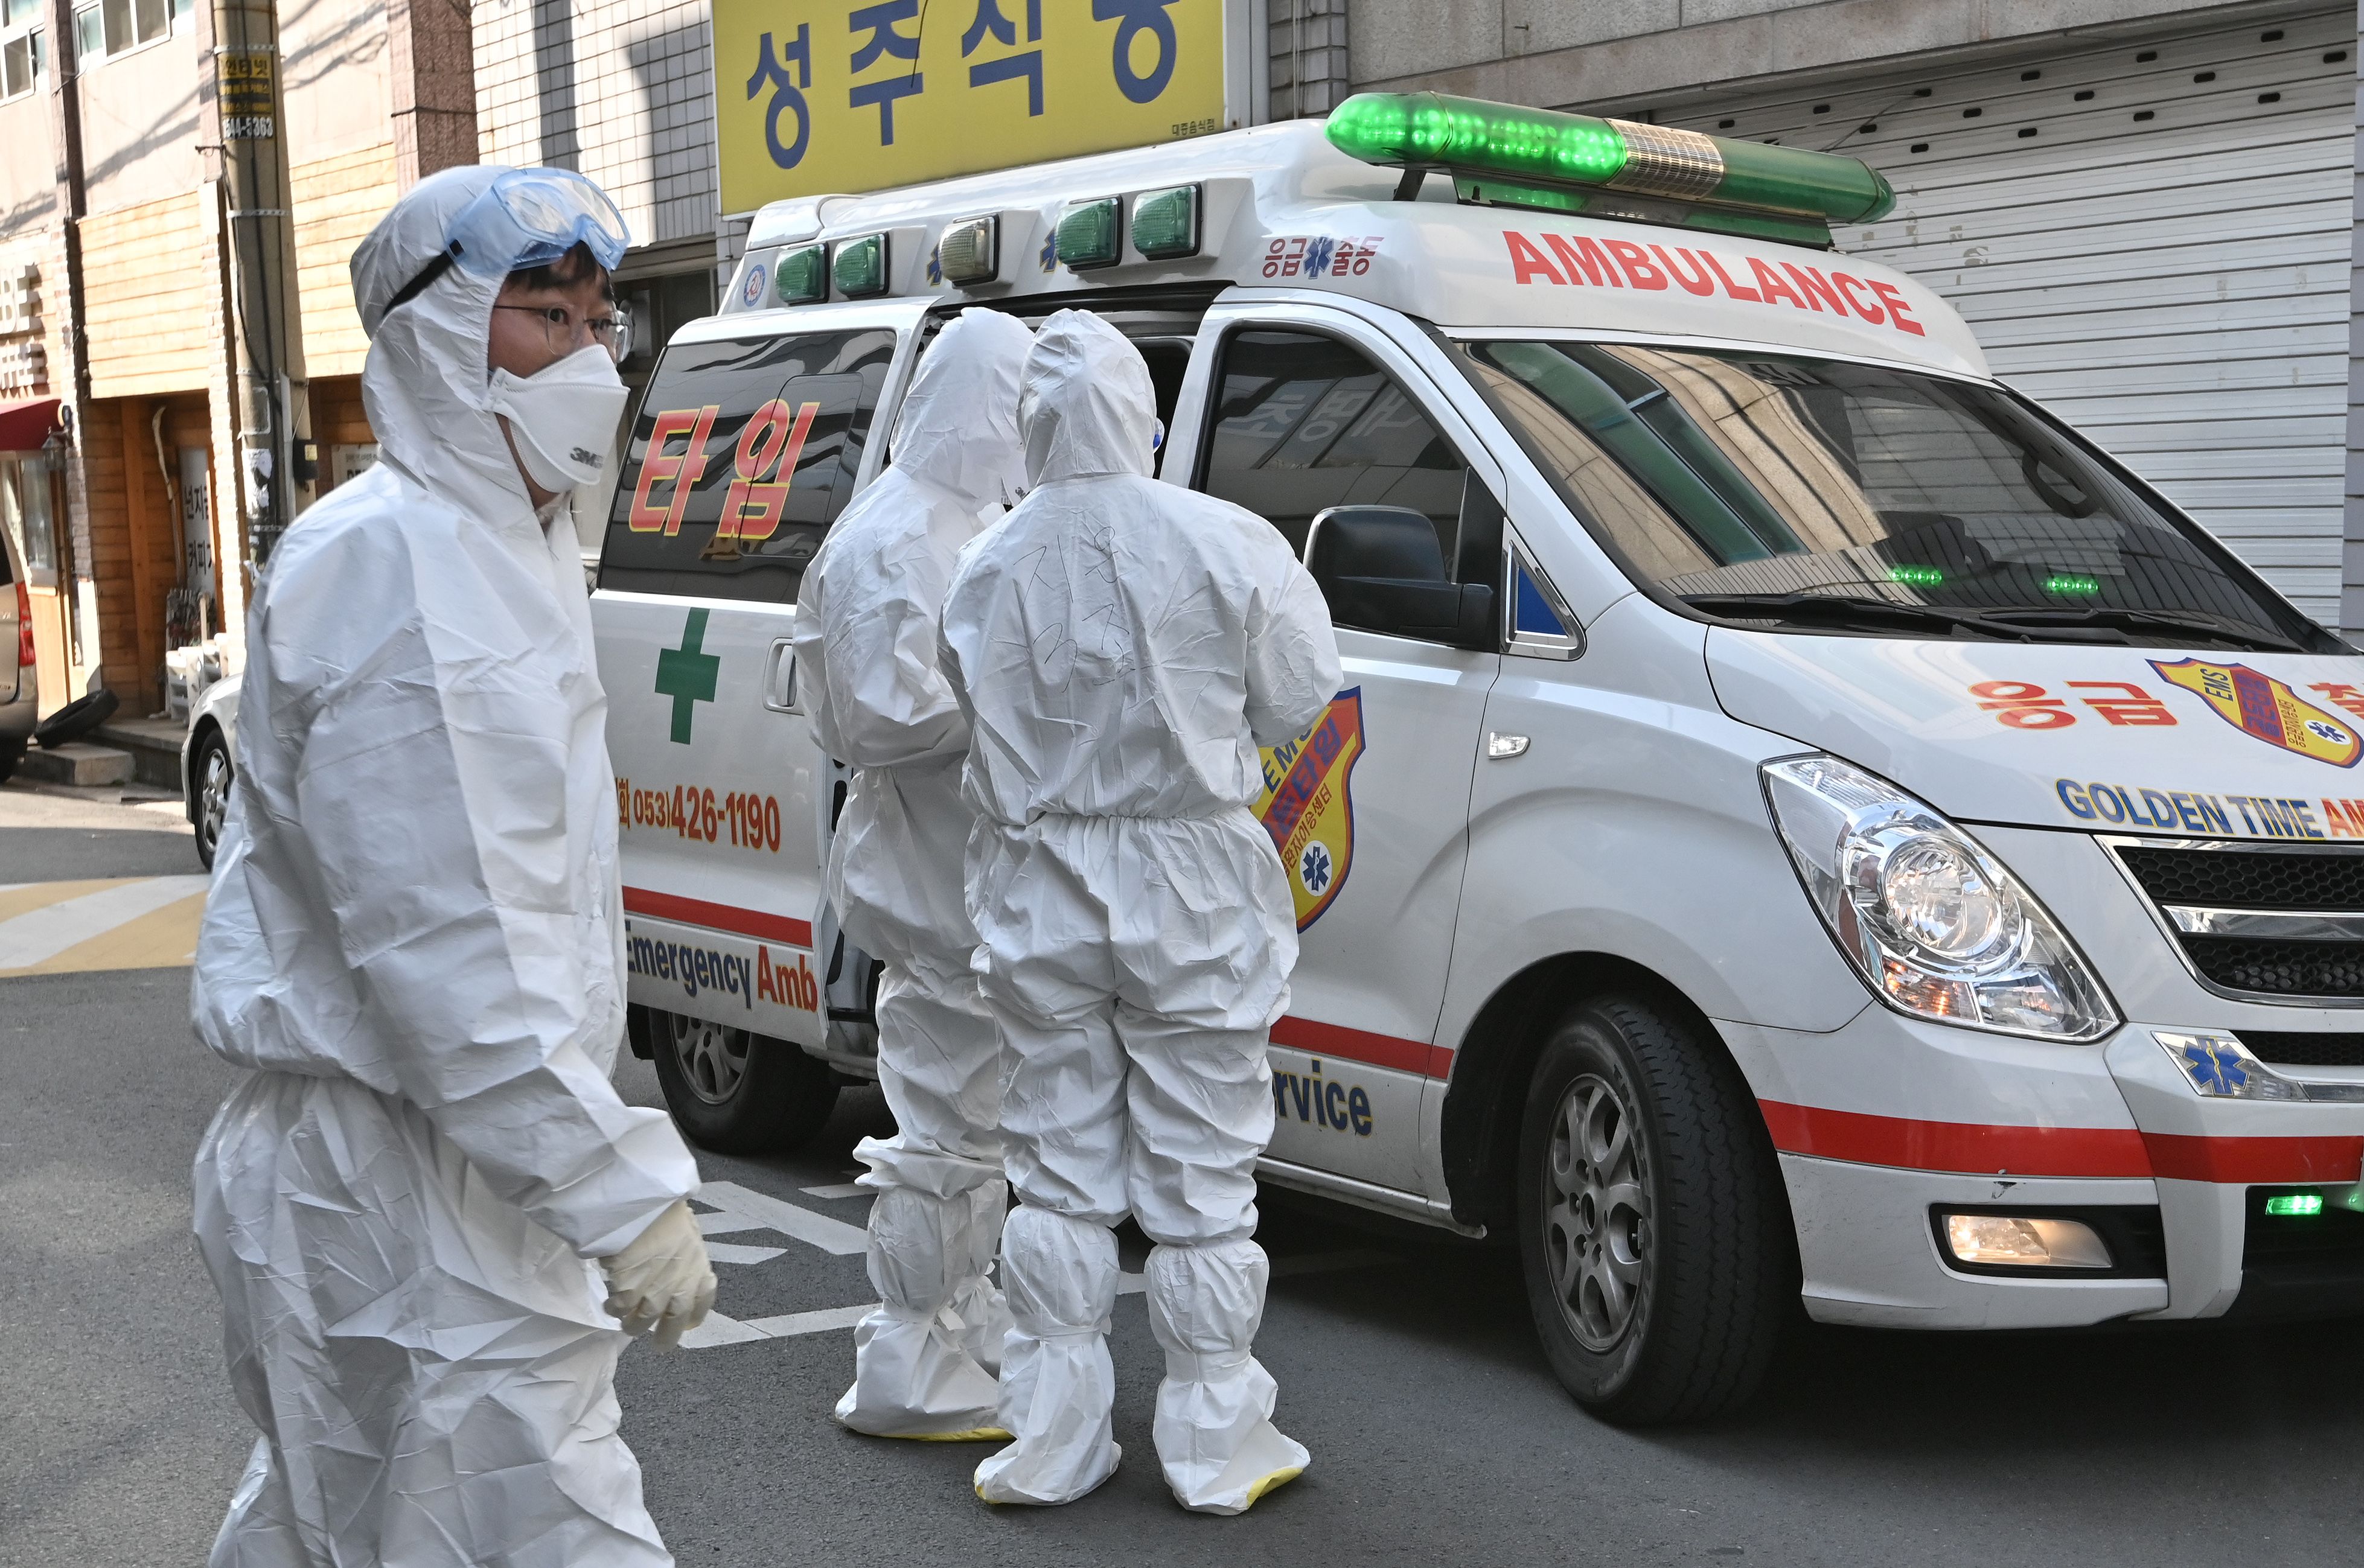 South Korean medical workers wearing protective gear visit a residence of people with suspected symptoms of the coronavirus in Daegu on Thursday.